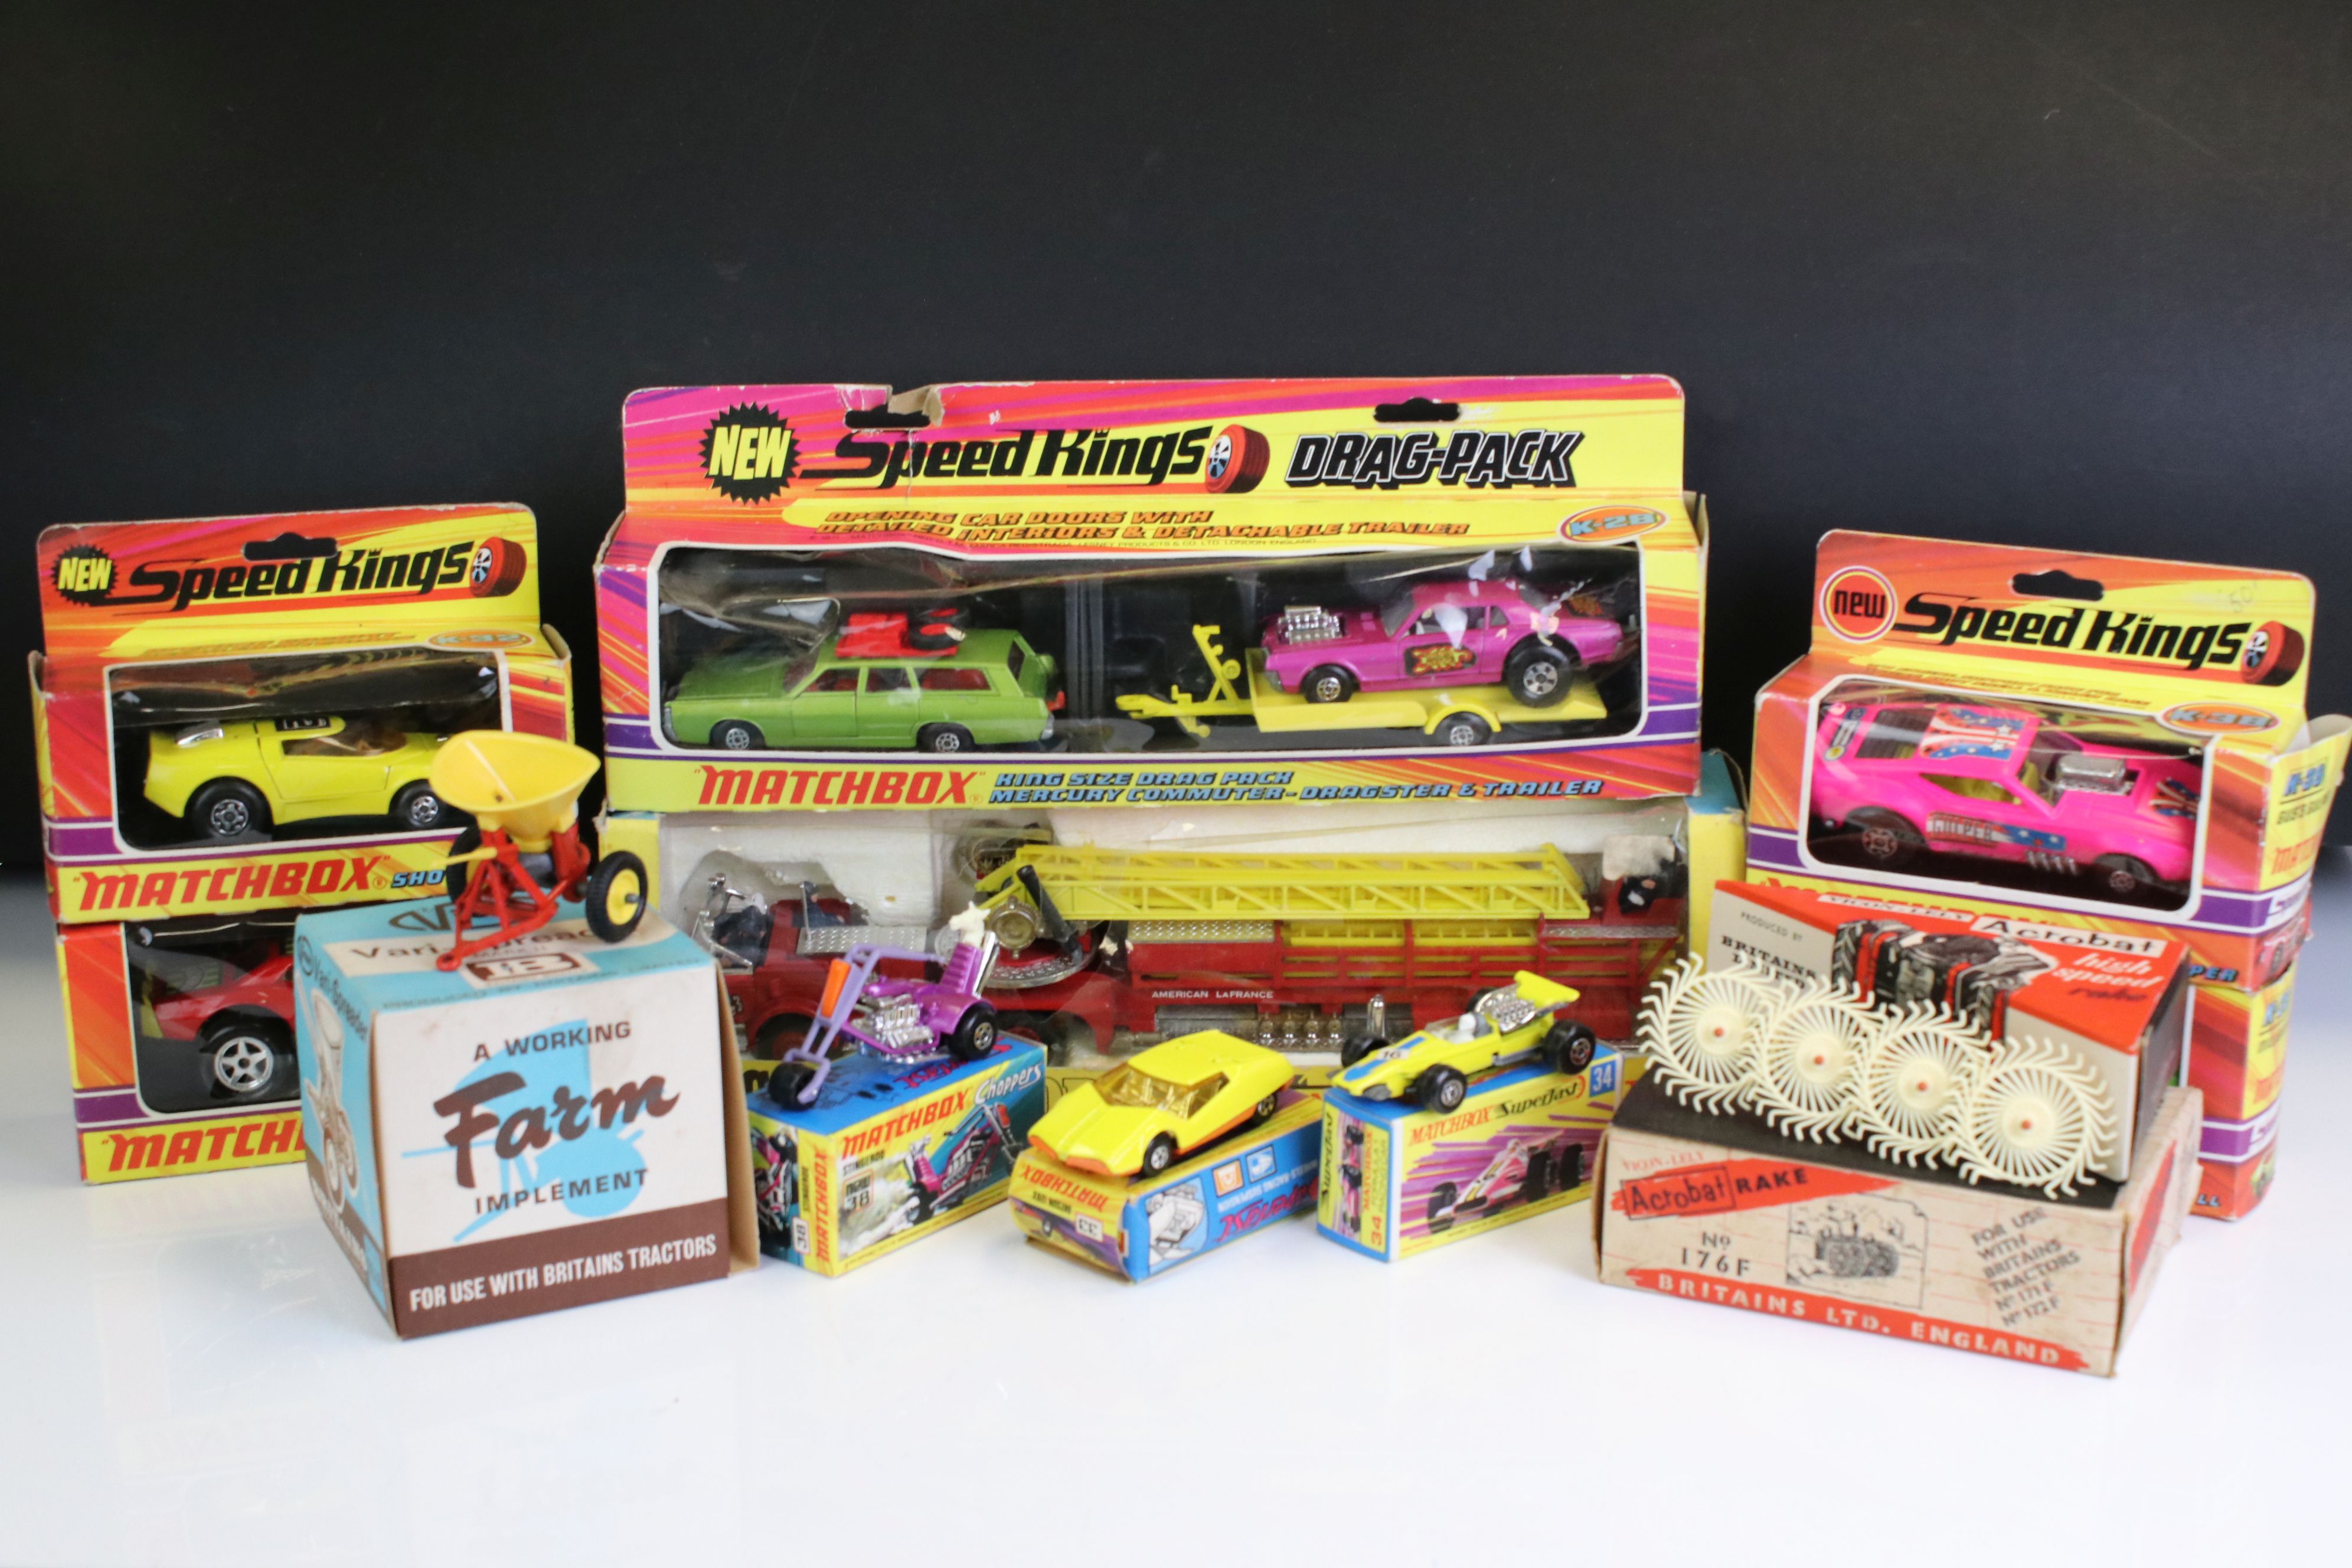 11 Boxed diecast models to include 5 x Matchbox Speed Kings (K-28 King Size Drag-Pack Mercury